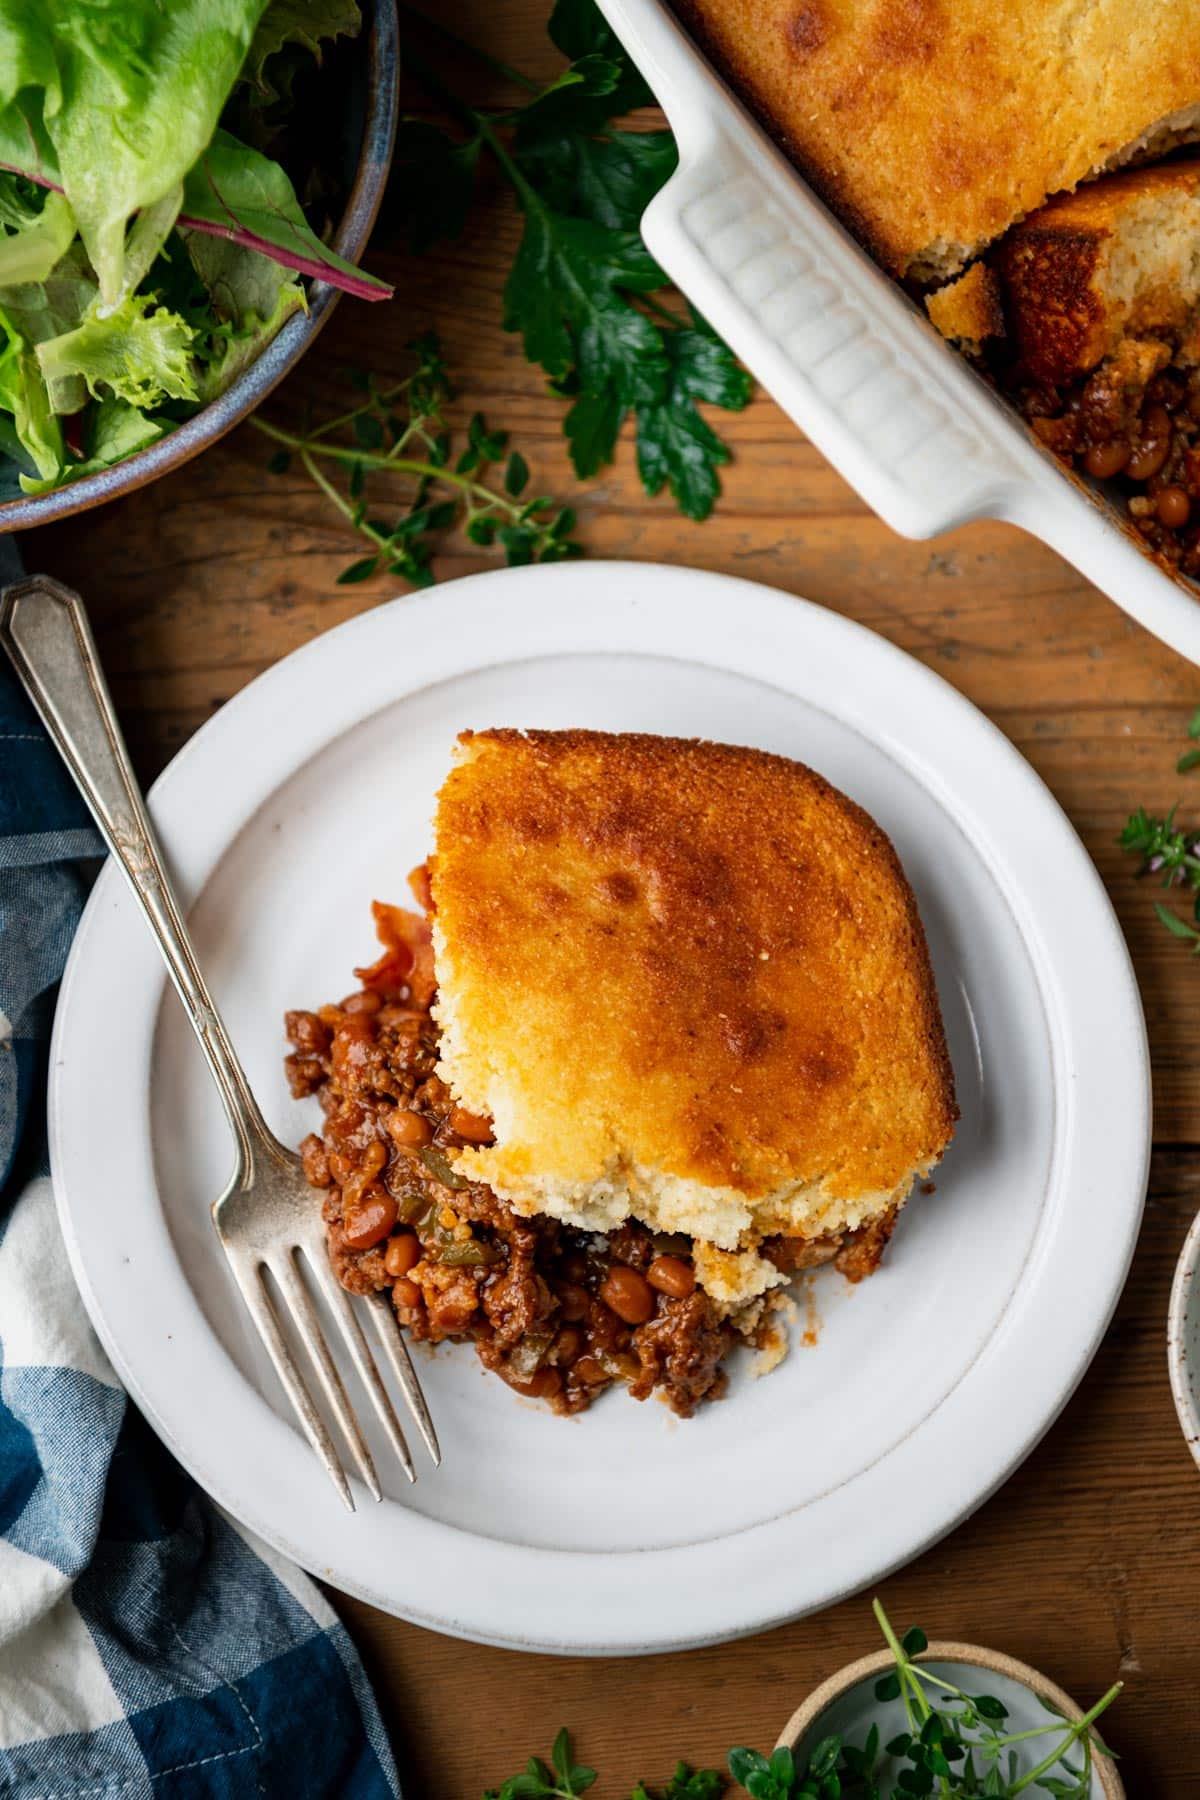 Overhead image of a bbq ground beef cornbread casserole on a wooden table with a side salad.